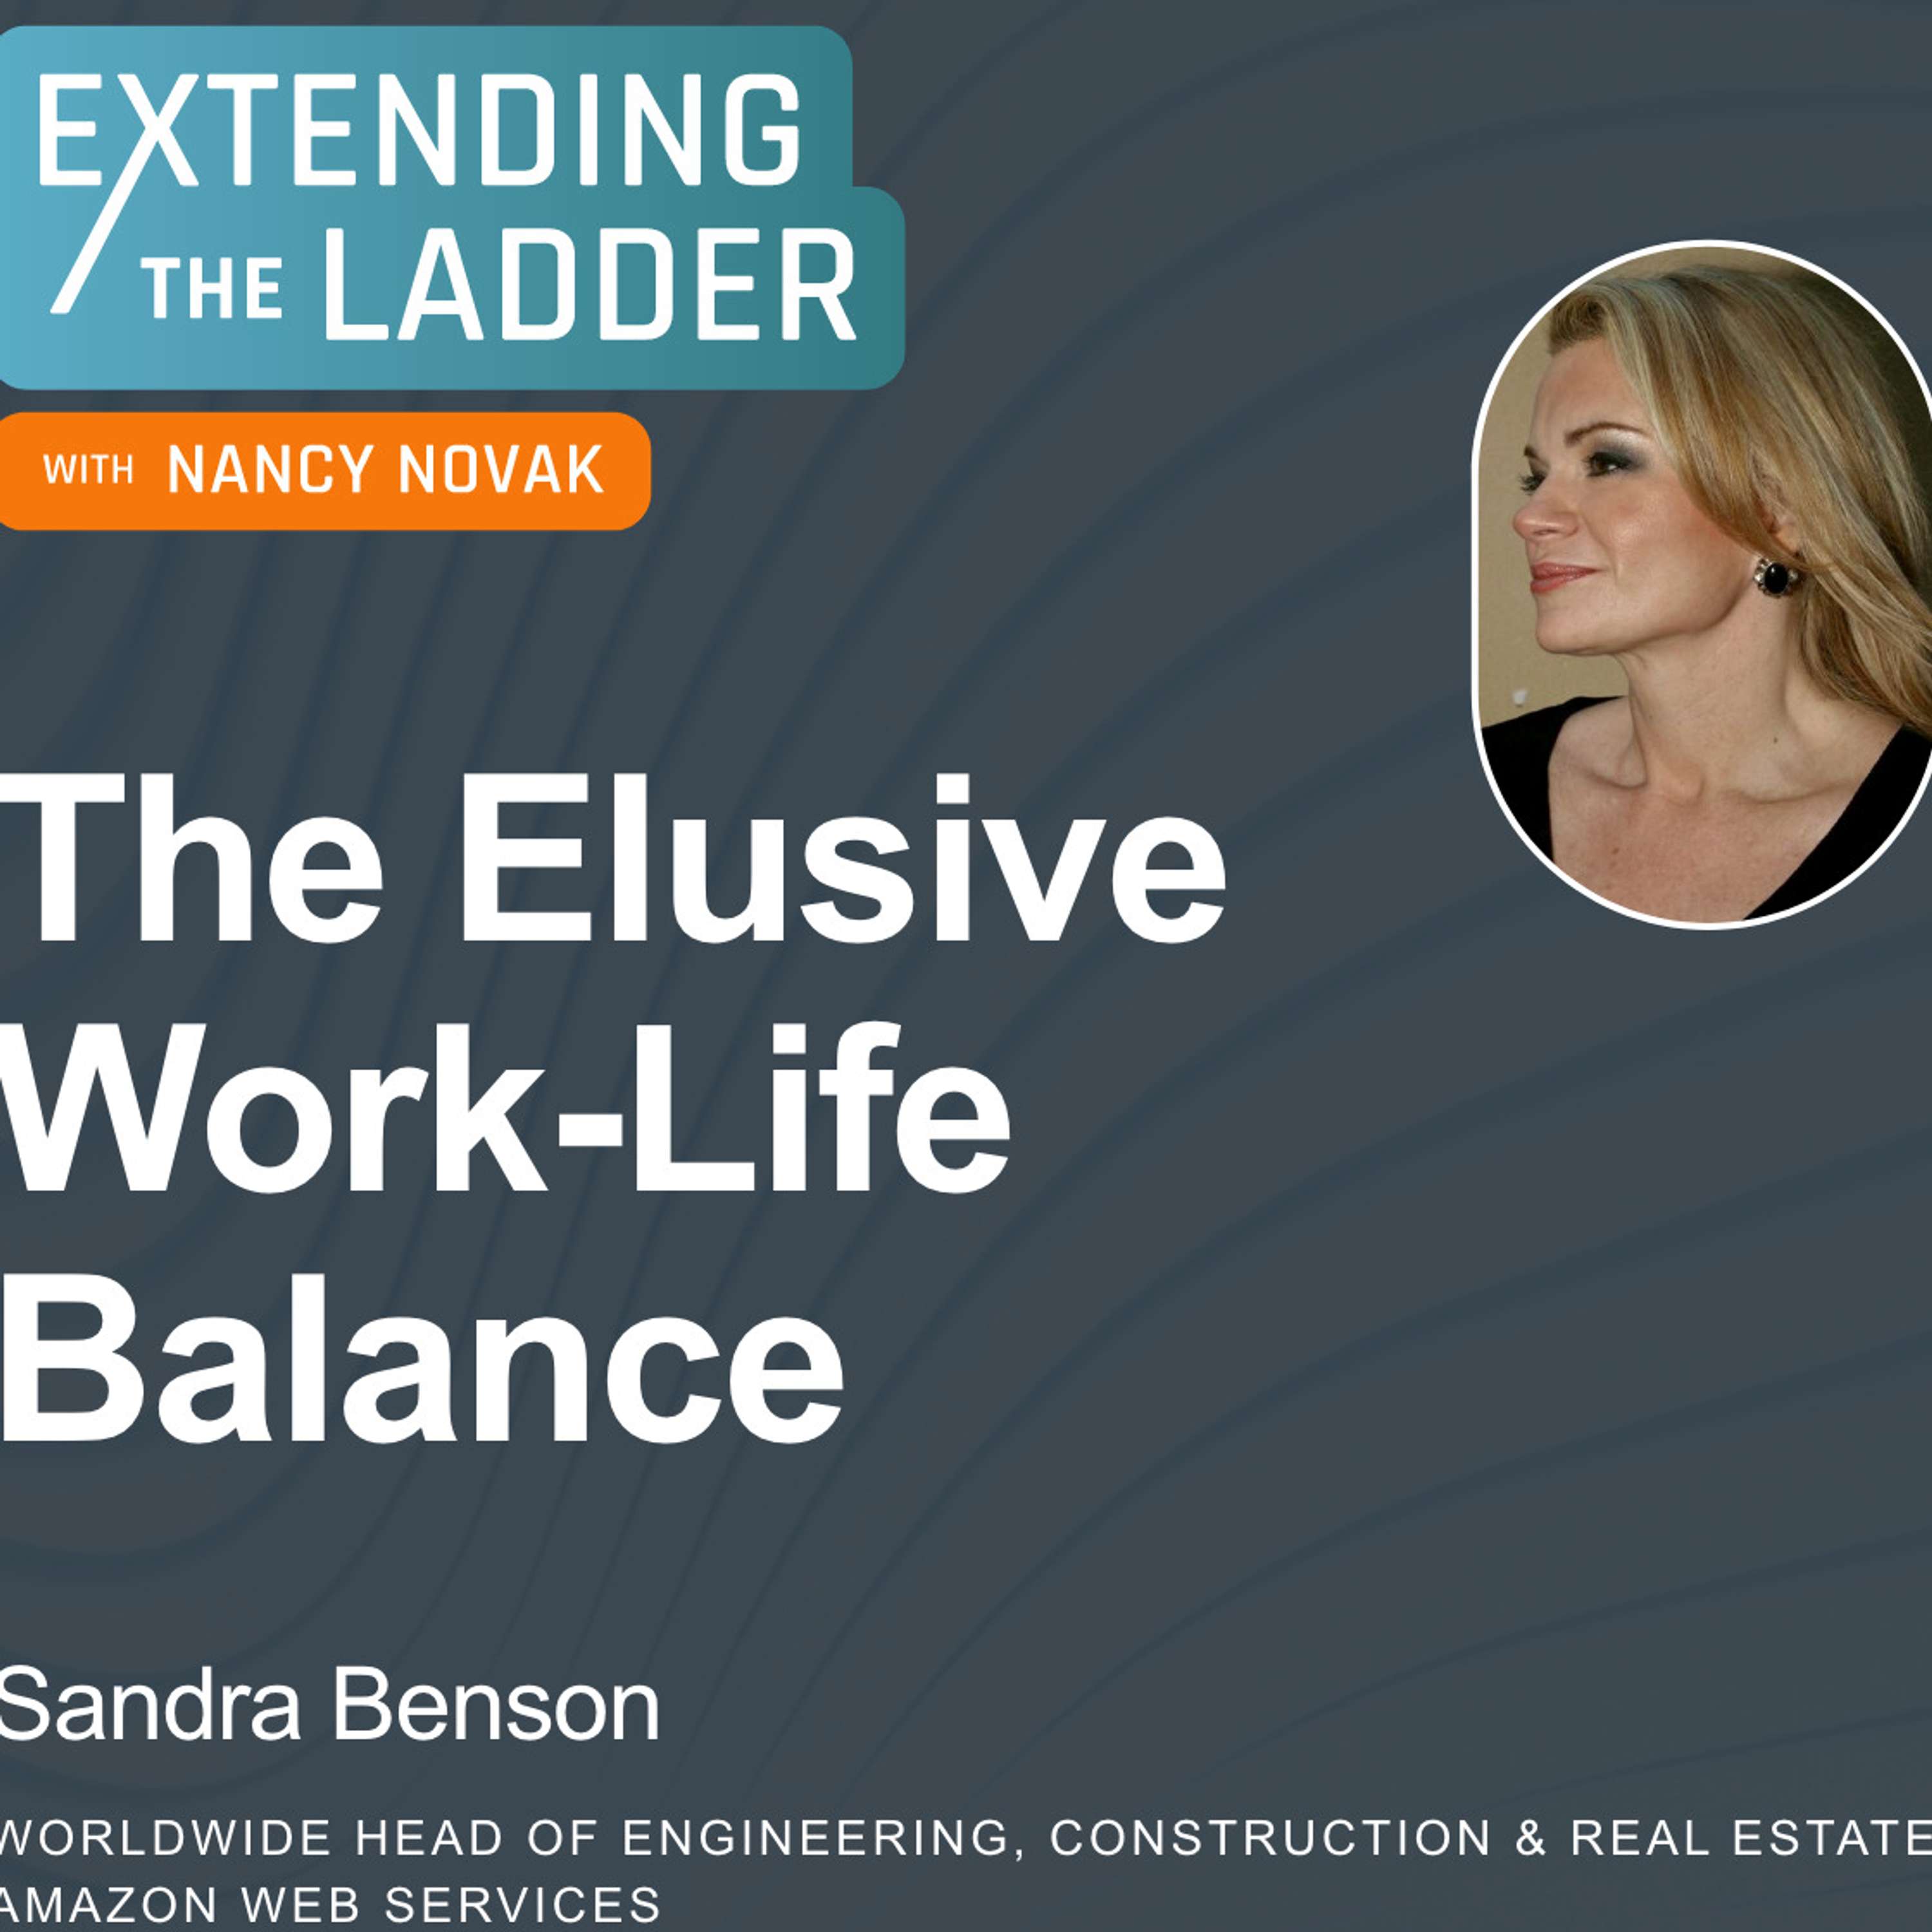 Finding the Ever Elusive Work-Life Balance